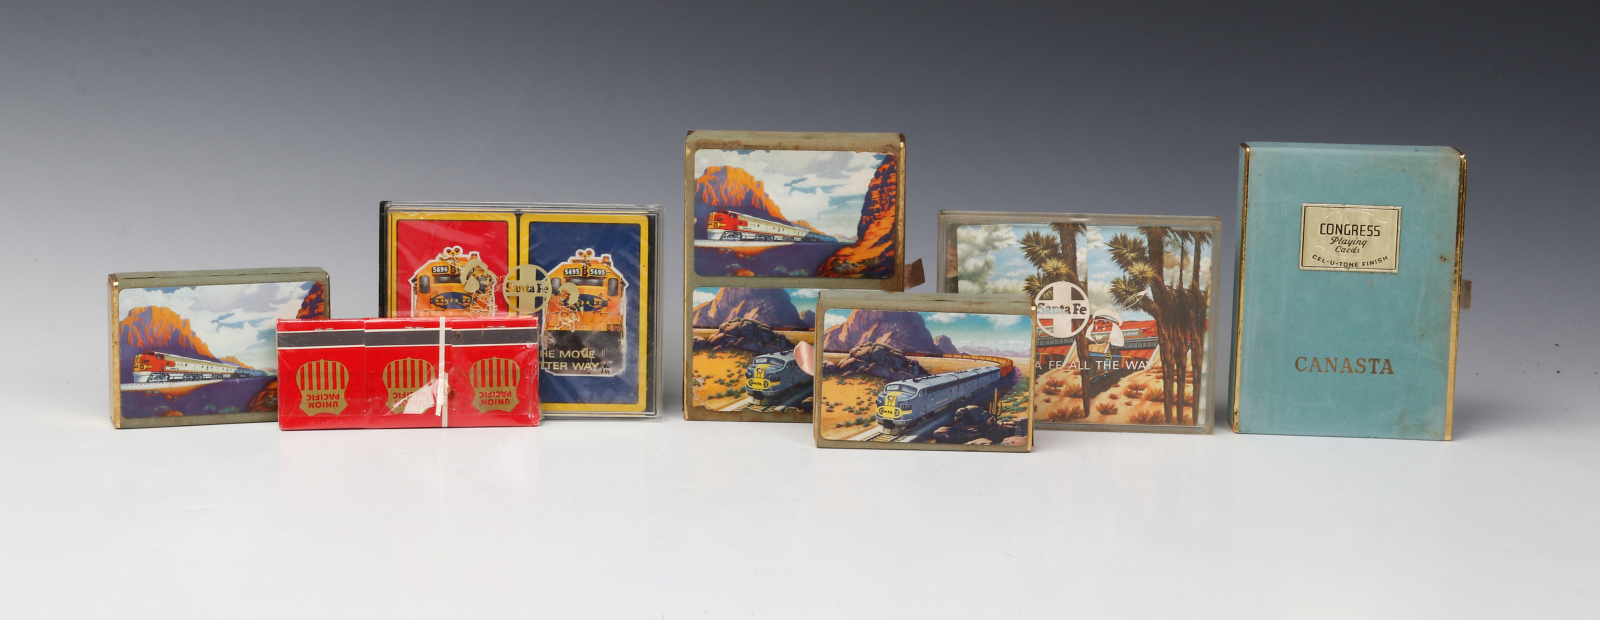 A COLLECTION OF SANTA FE RAILROAD PLAYING CARDS